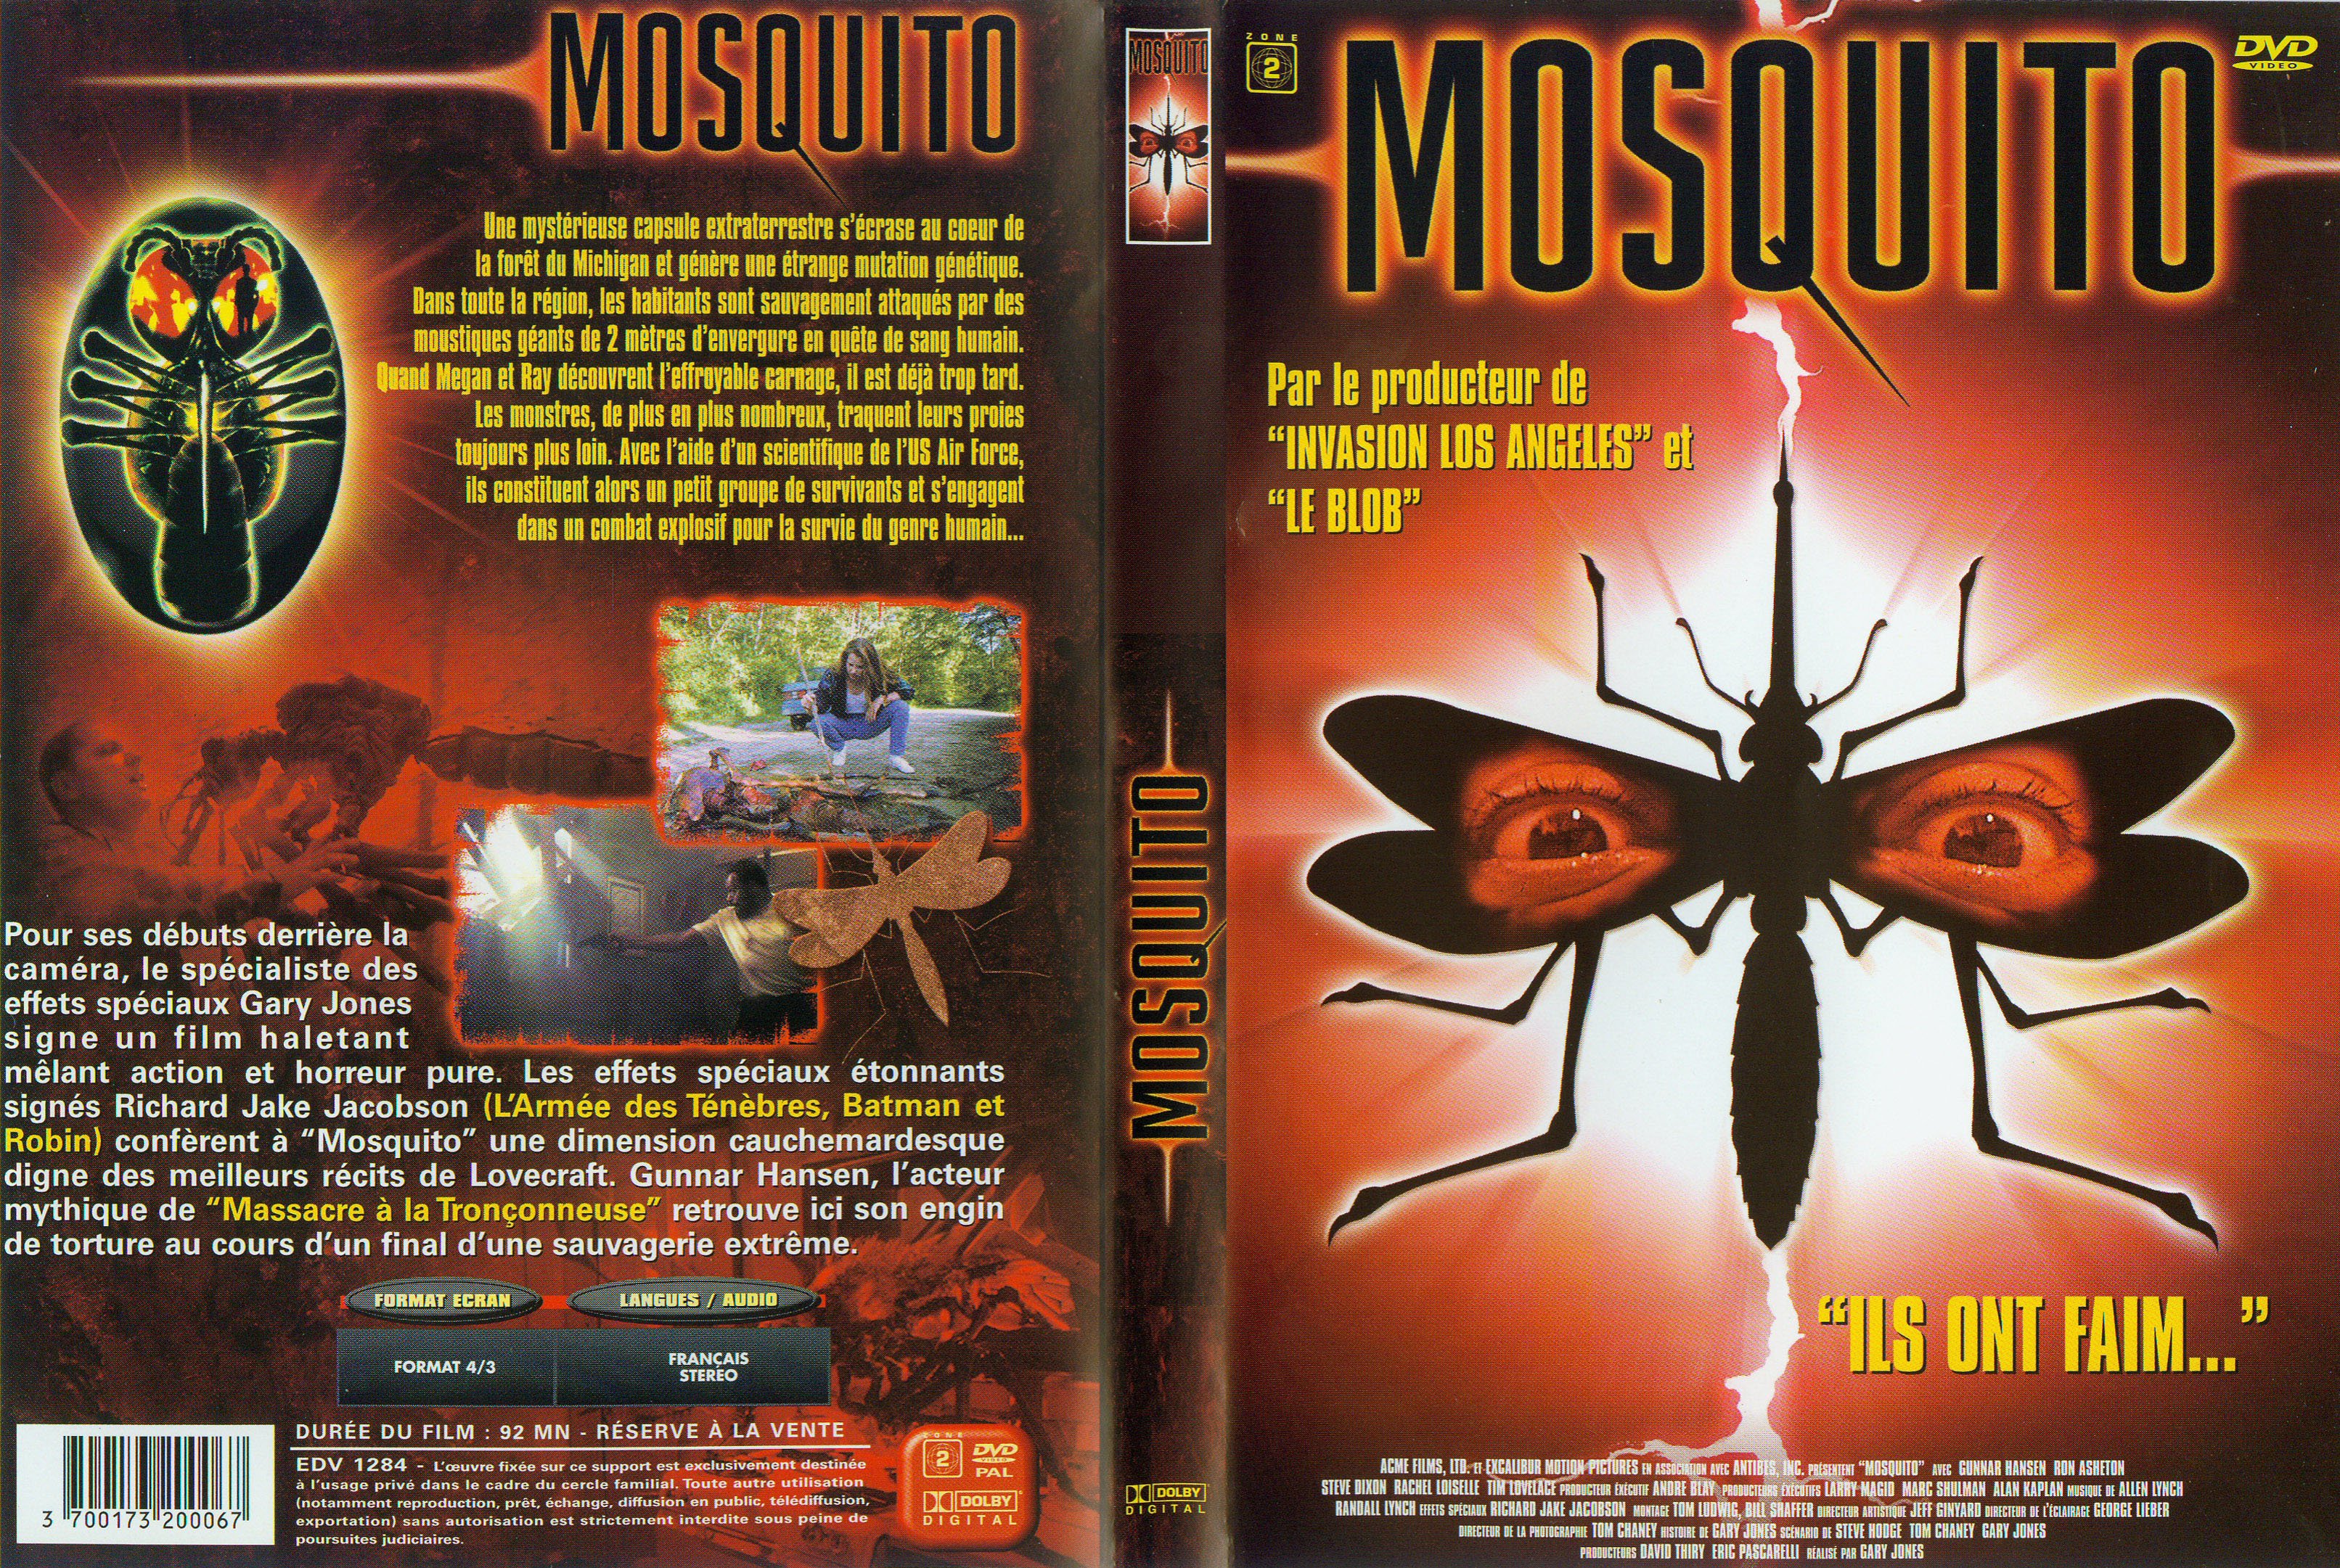 Jaquette DVD Mosquito